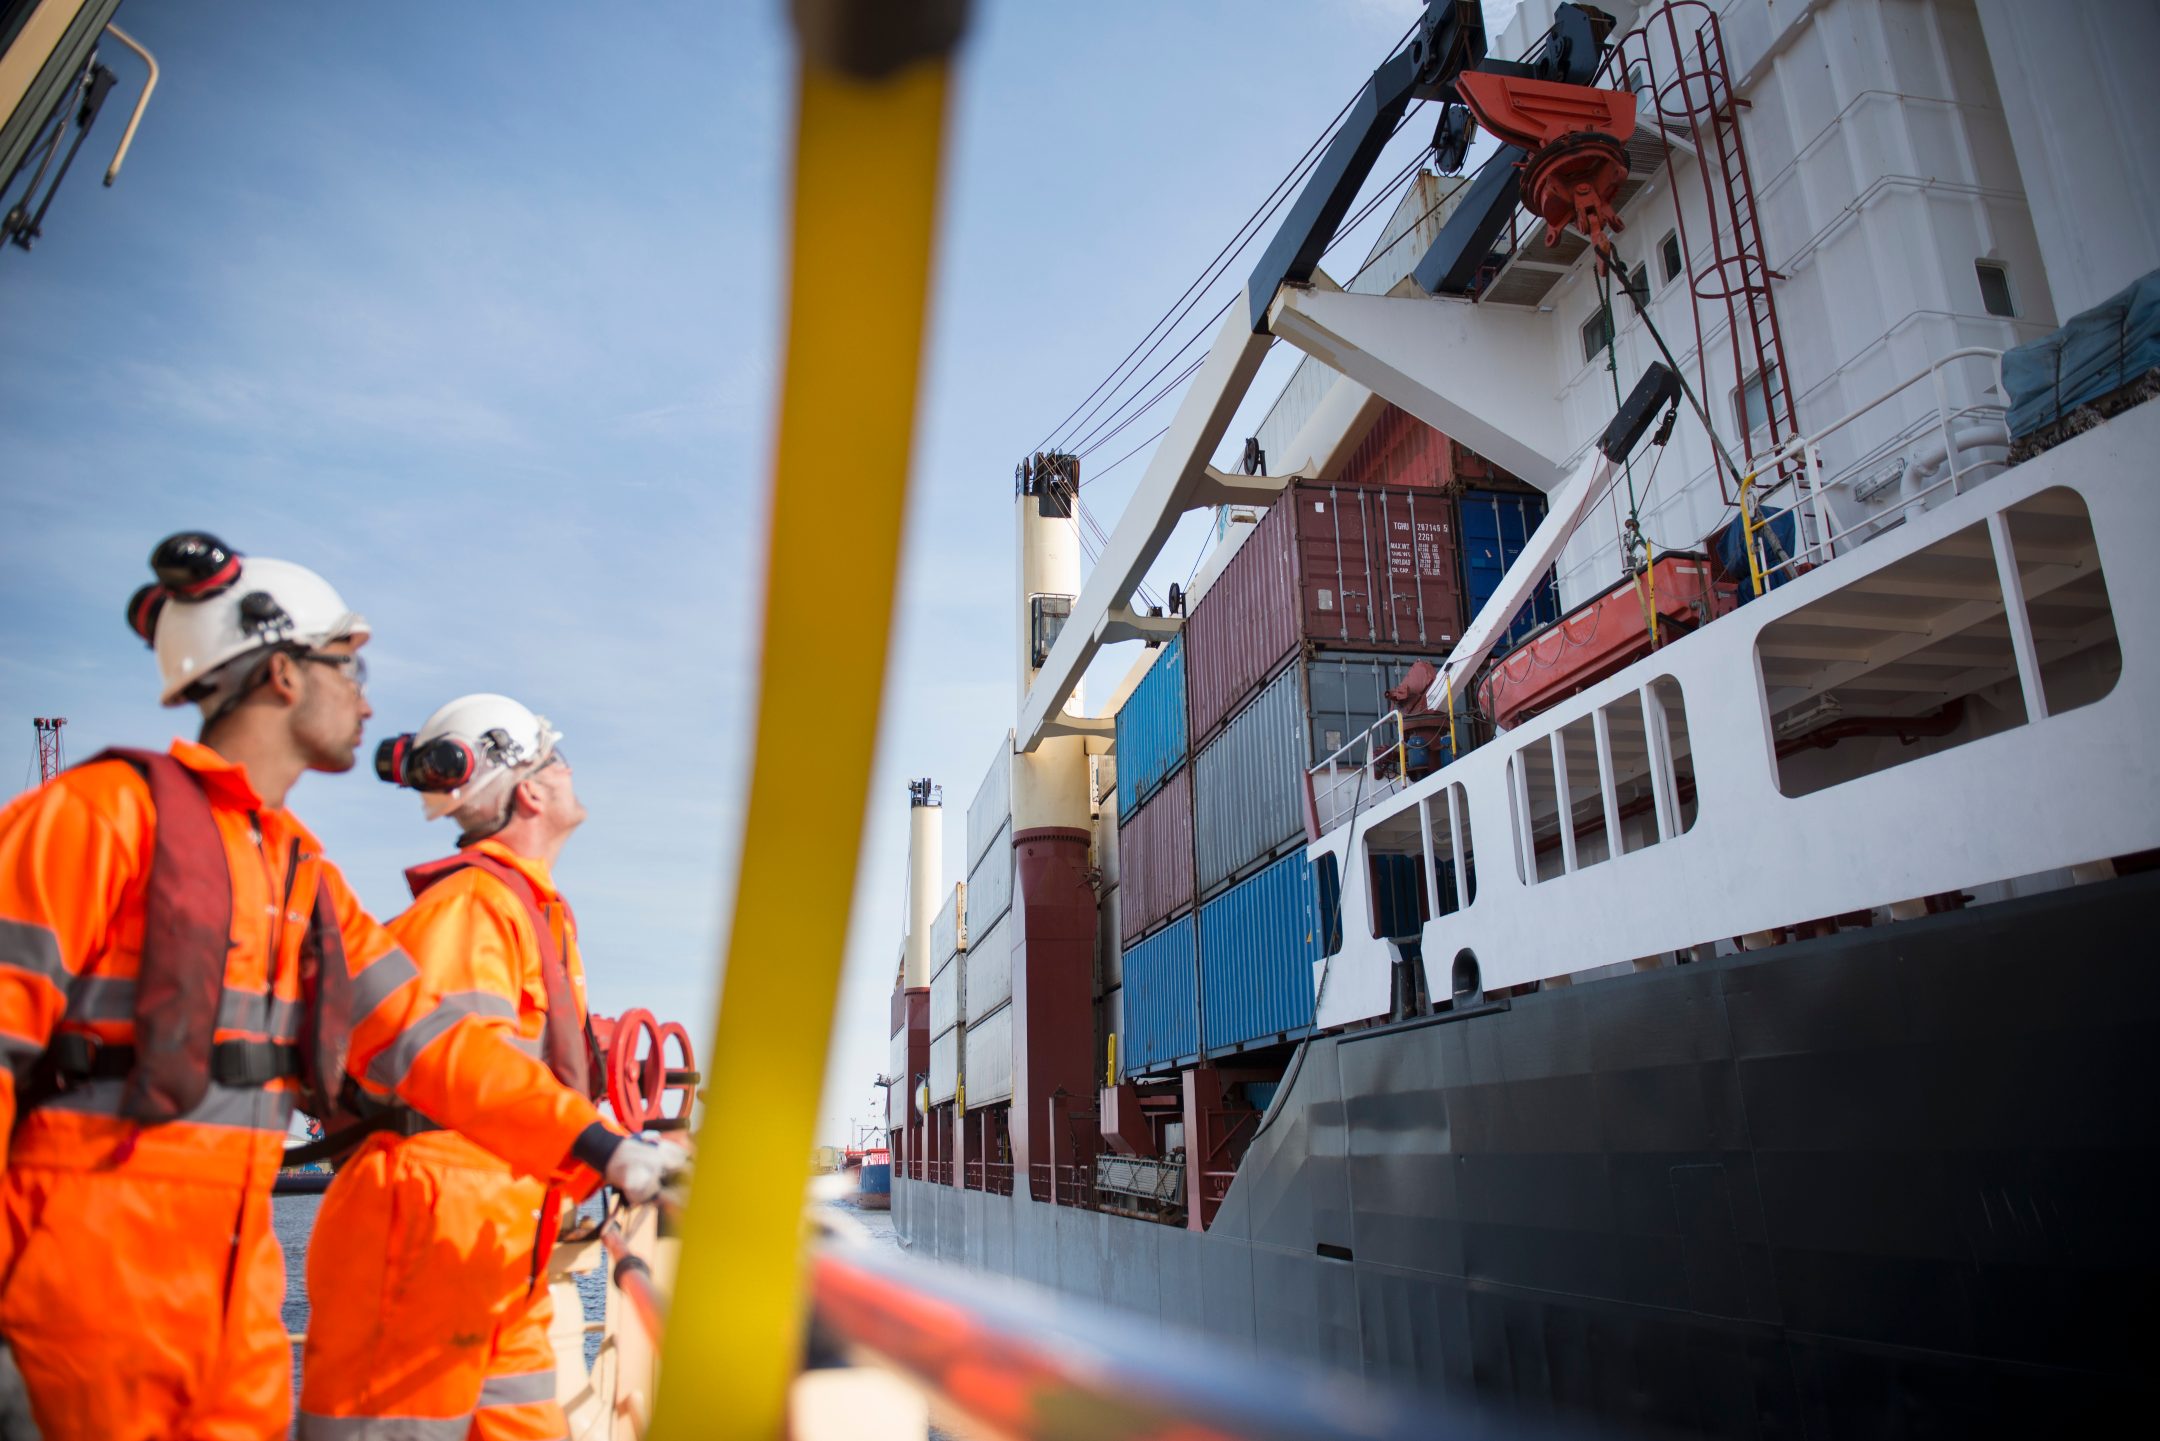 A pair of tug workers stare up at a docked container ship.